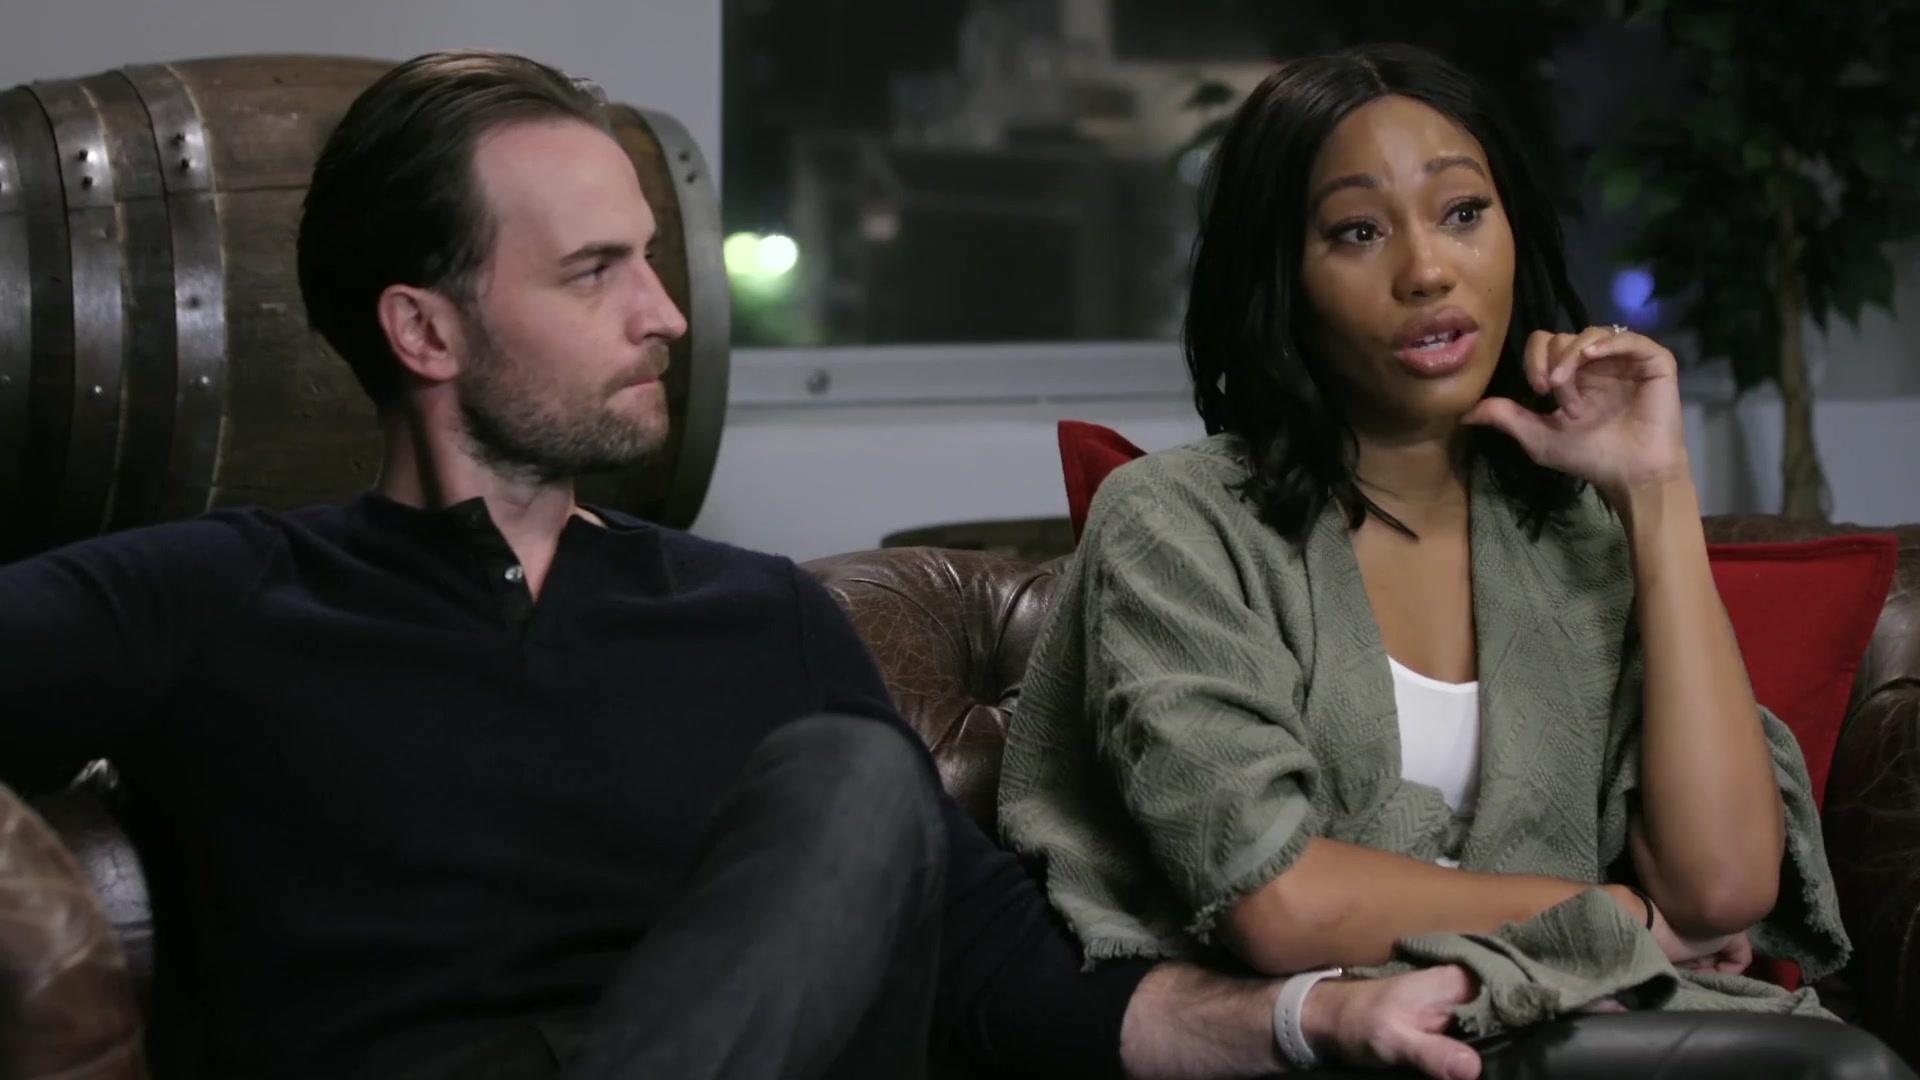 Watch Tee Tee & Shawn's Emotional Therapy Session | Growing Up Hip Hop Video Extras